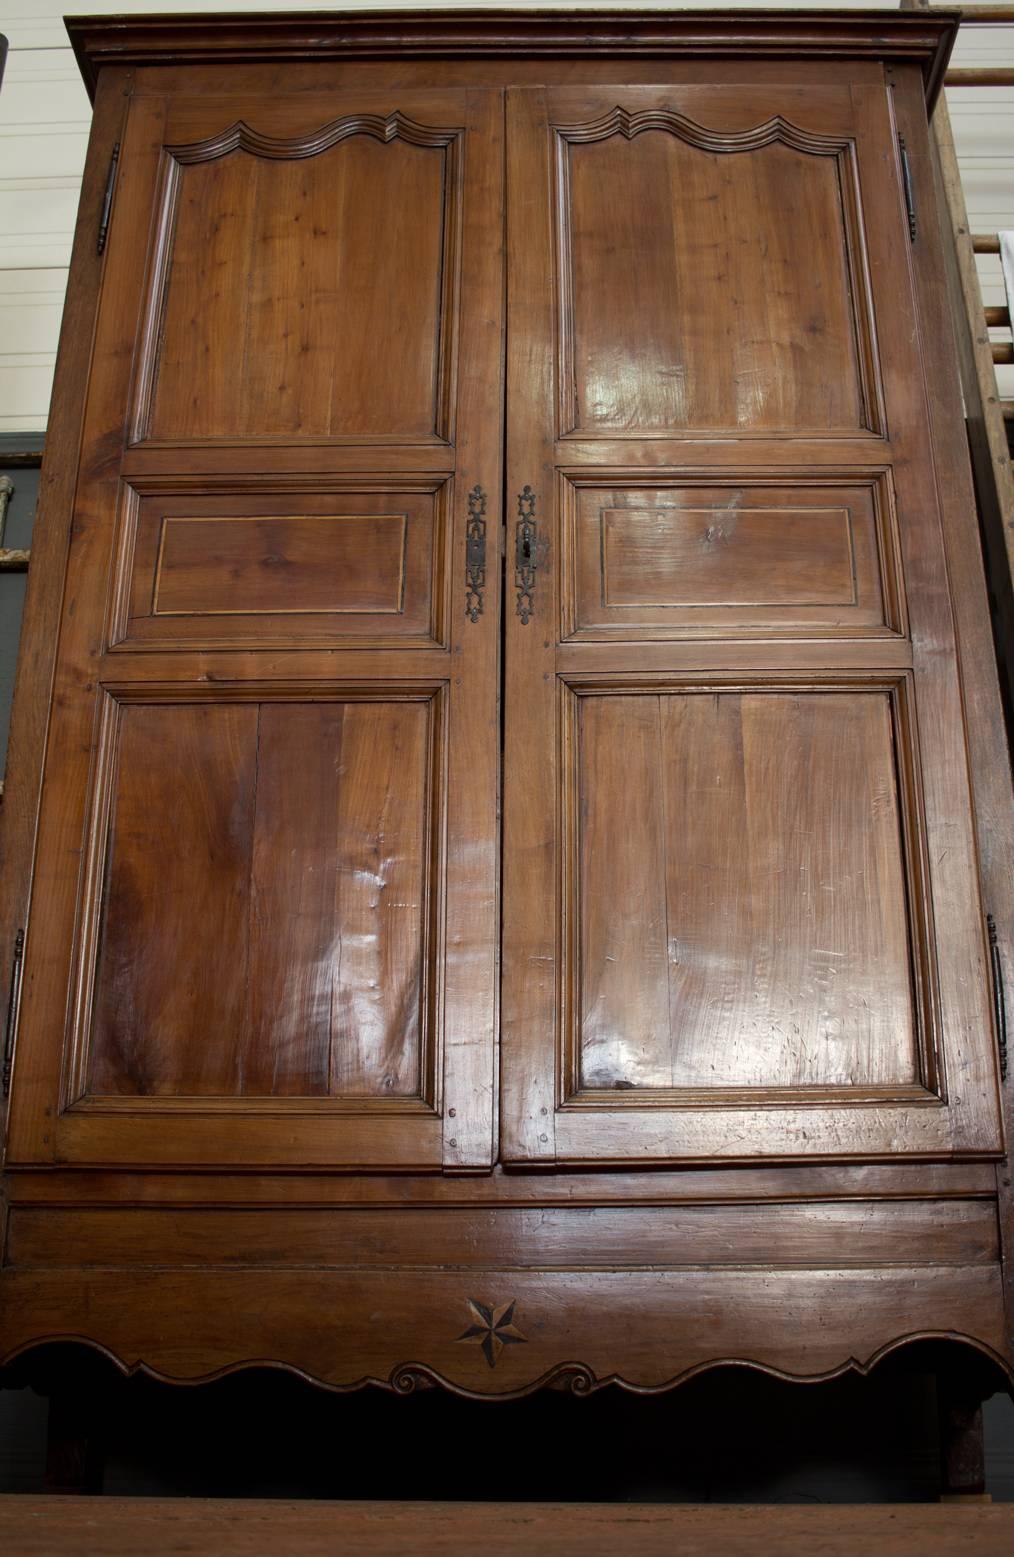 Beautiful antique French walnut armoire on cabriole legs. It has a rare and unusual five pointed star inlay thought to represent good fortune. Beautiful patina.

In more recent times, the interior has been retrofitted with cupboards and drawers.